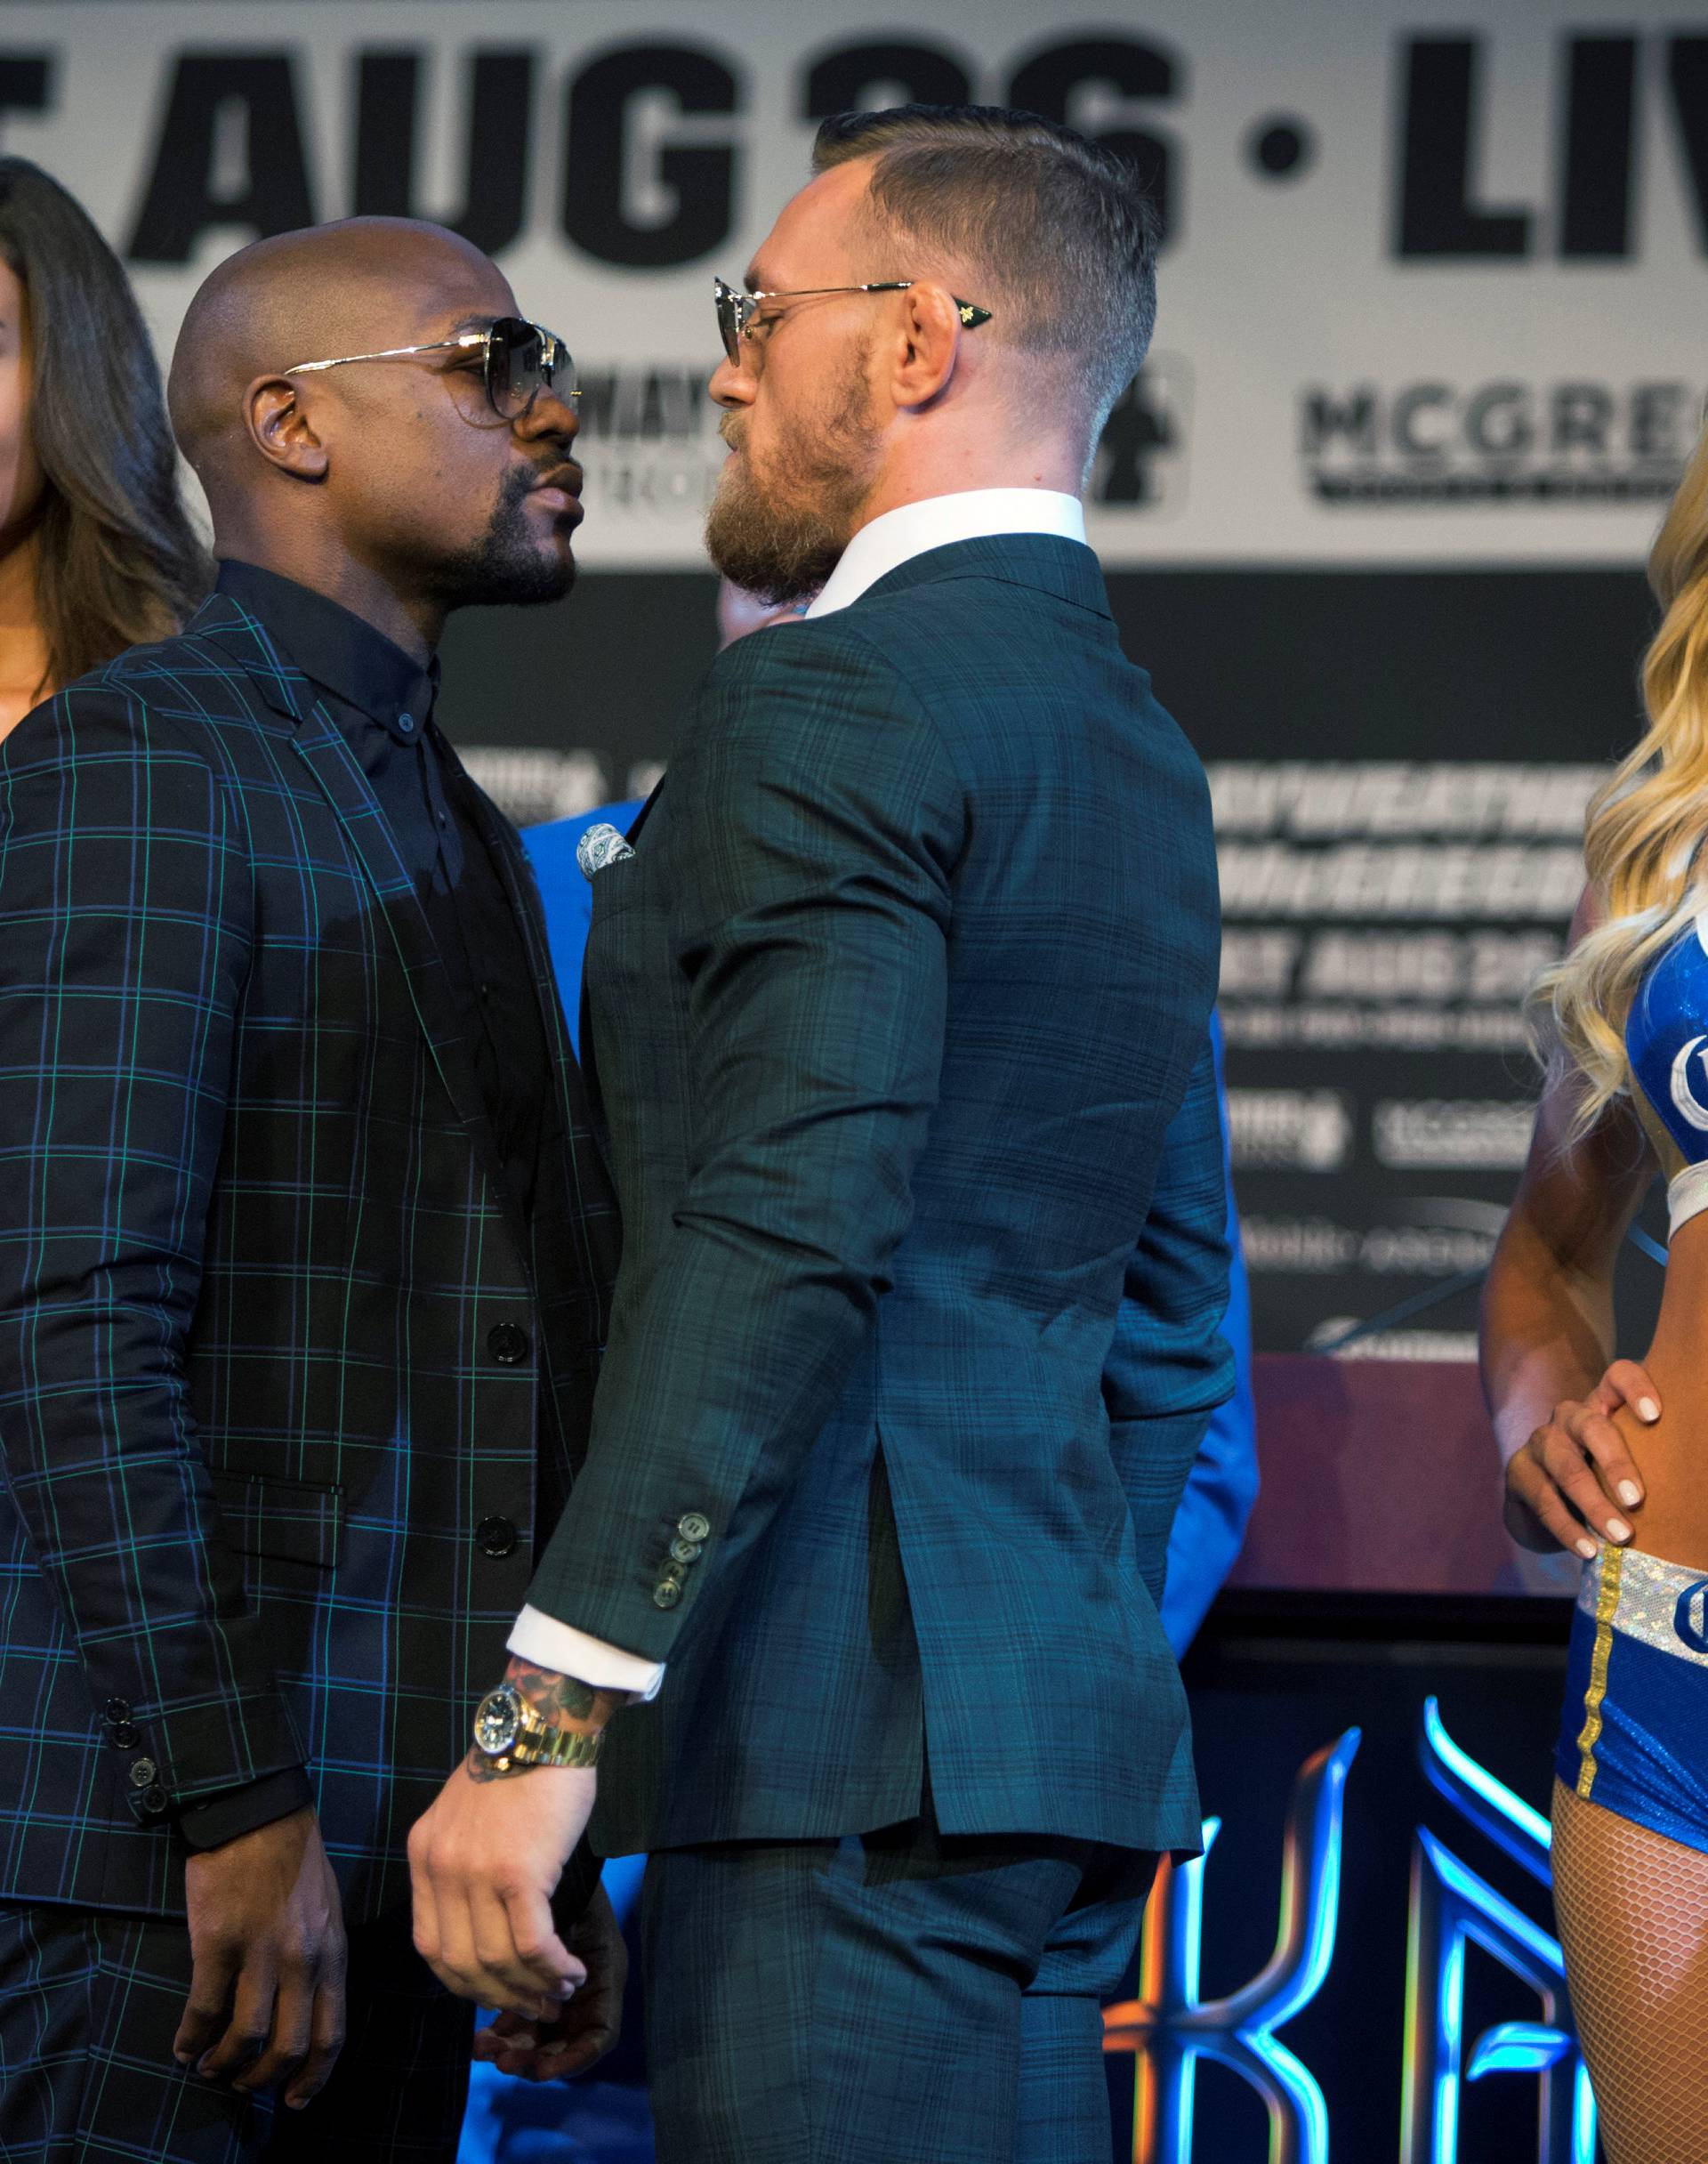 Undefeated boxer Floyd Mayweather Jr. (L) of the U.S. and UFC lightweight champion Conor McGregor of Ireland face off during a news conference in Las Vegas